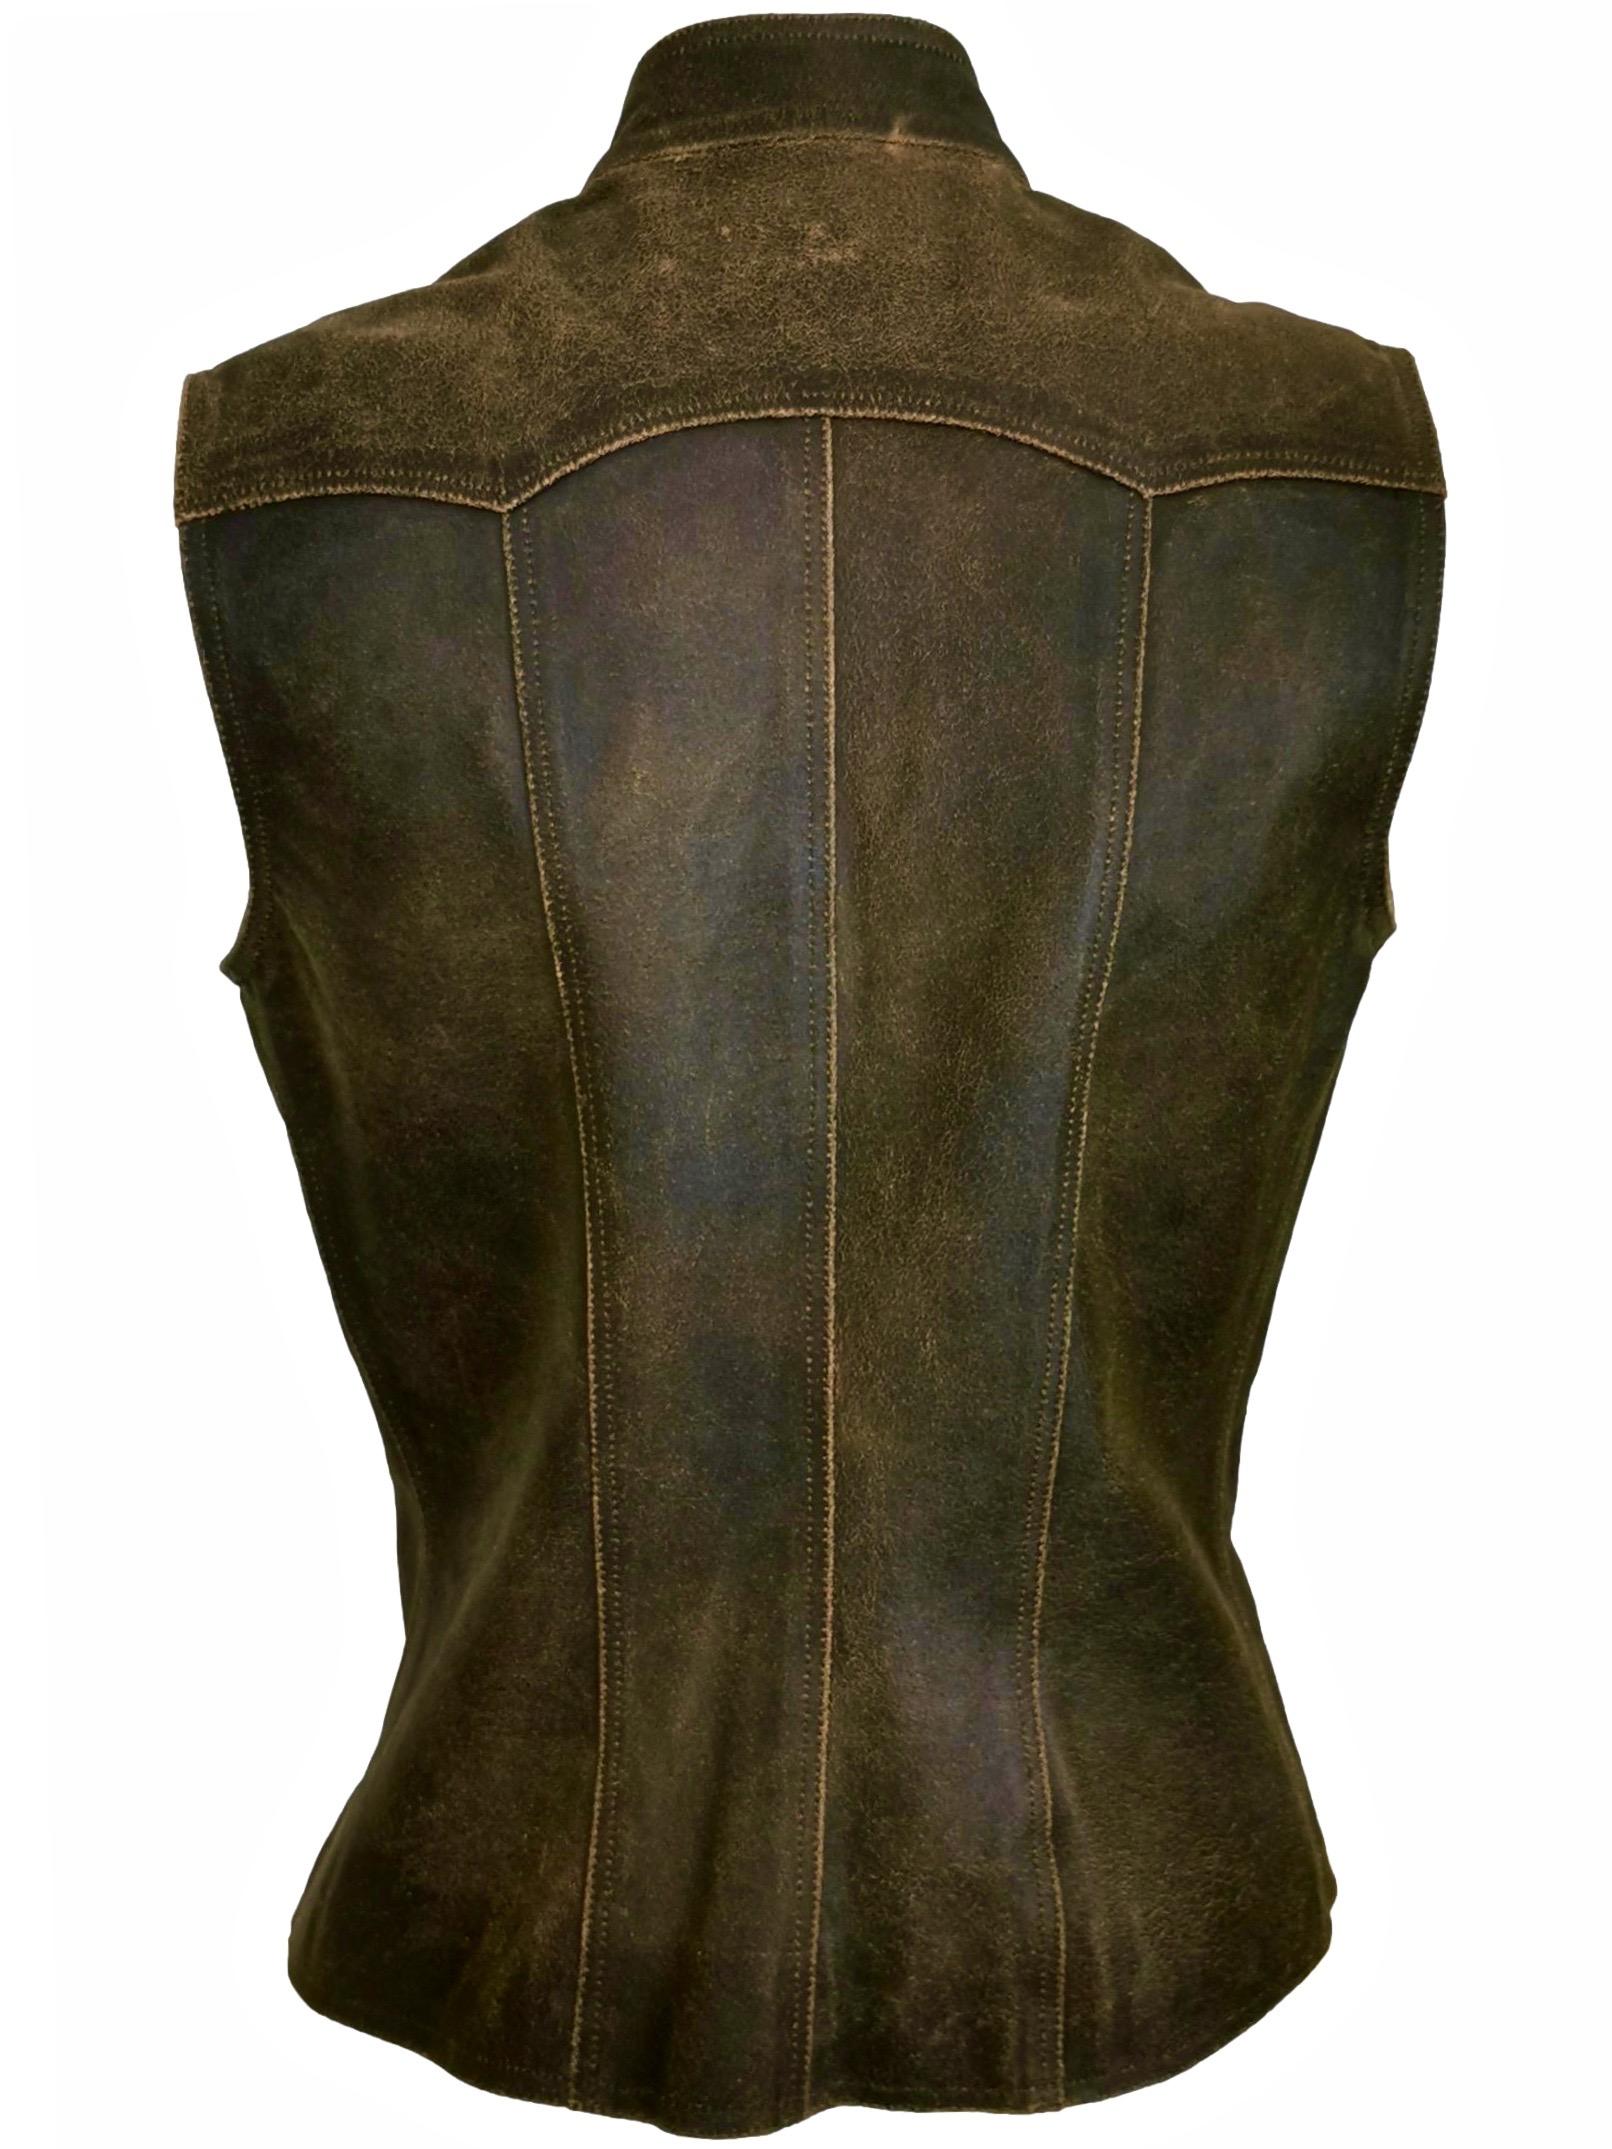 Women's Chanel Calfskin Leather Vest Fully Lined